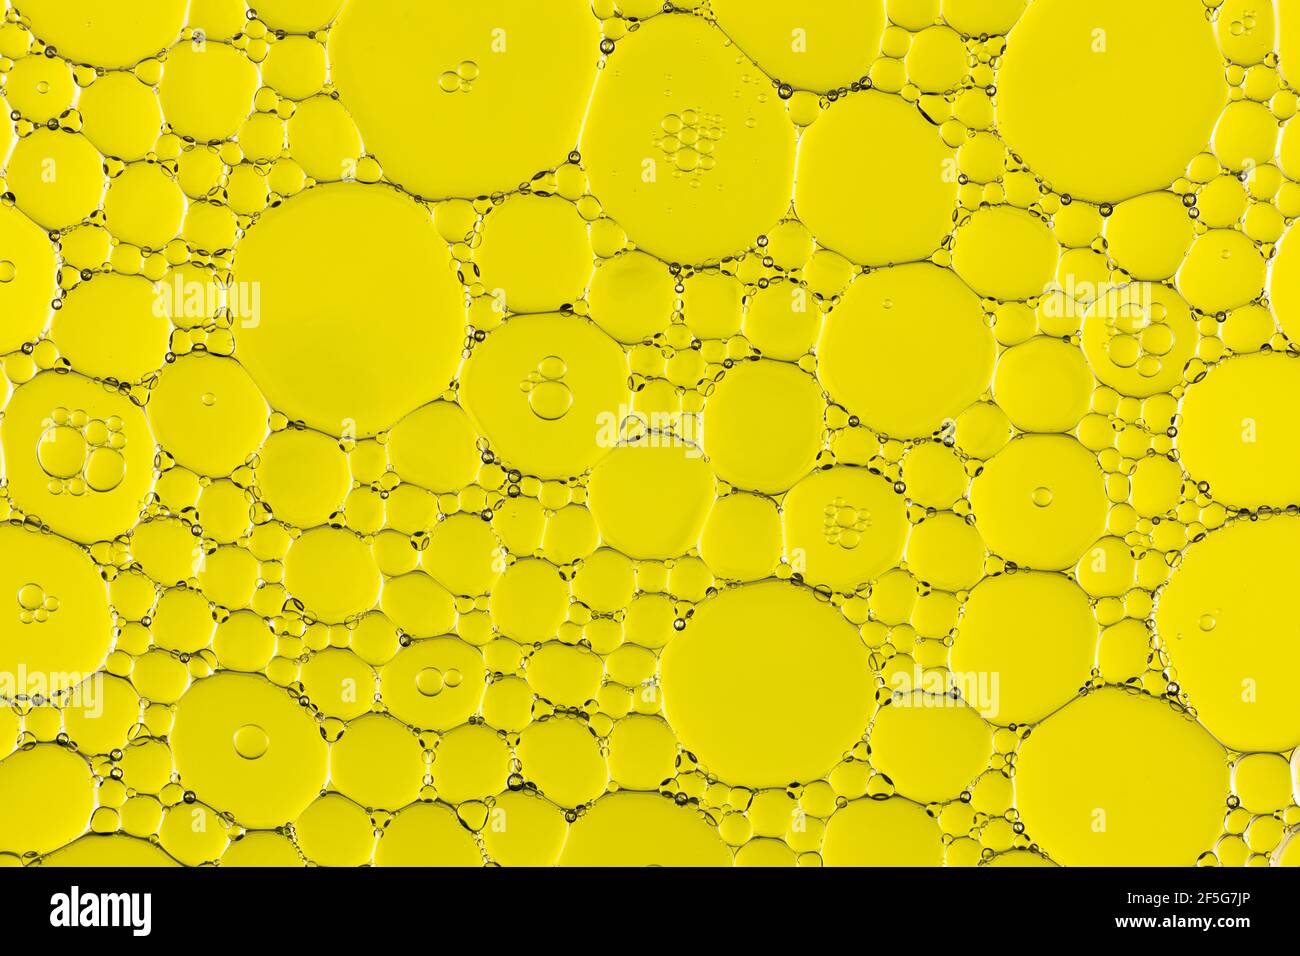 Oil and Water Abstract In Yellow Stock Photo